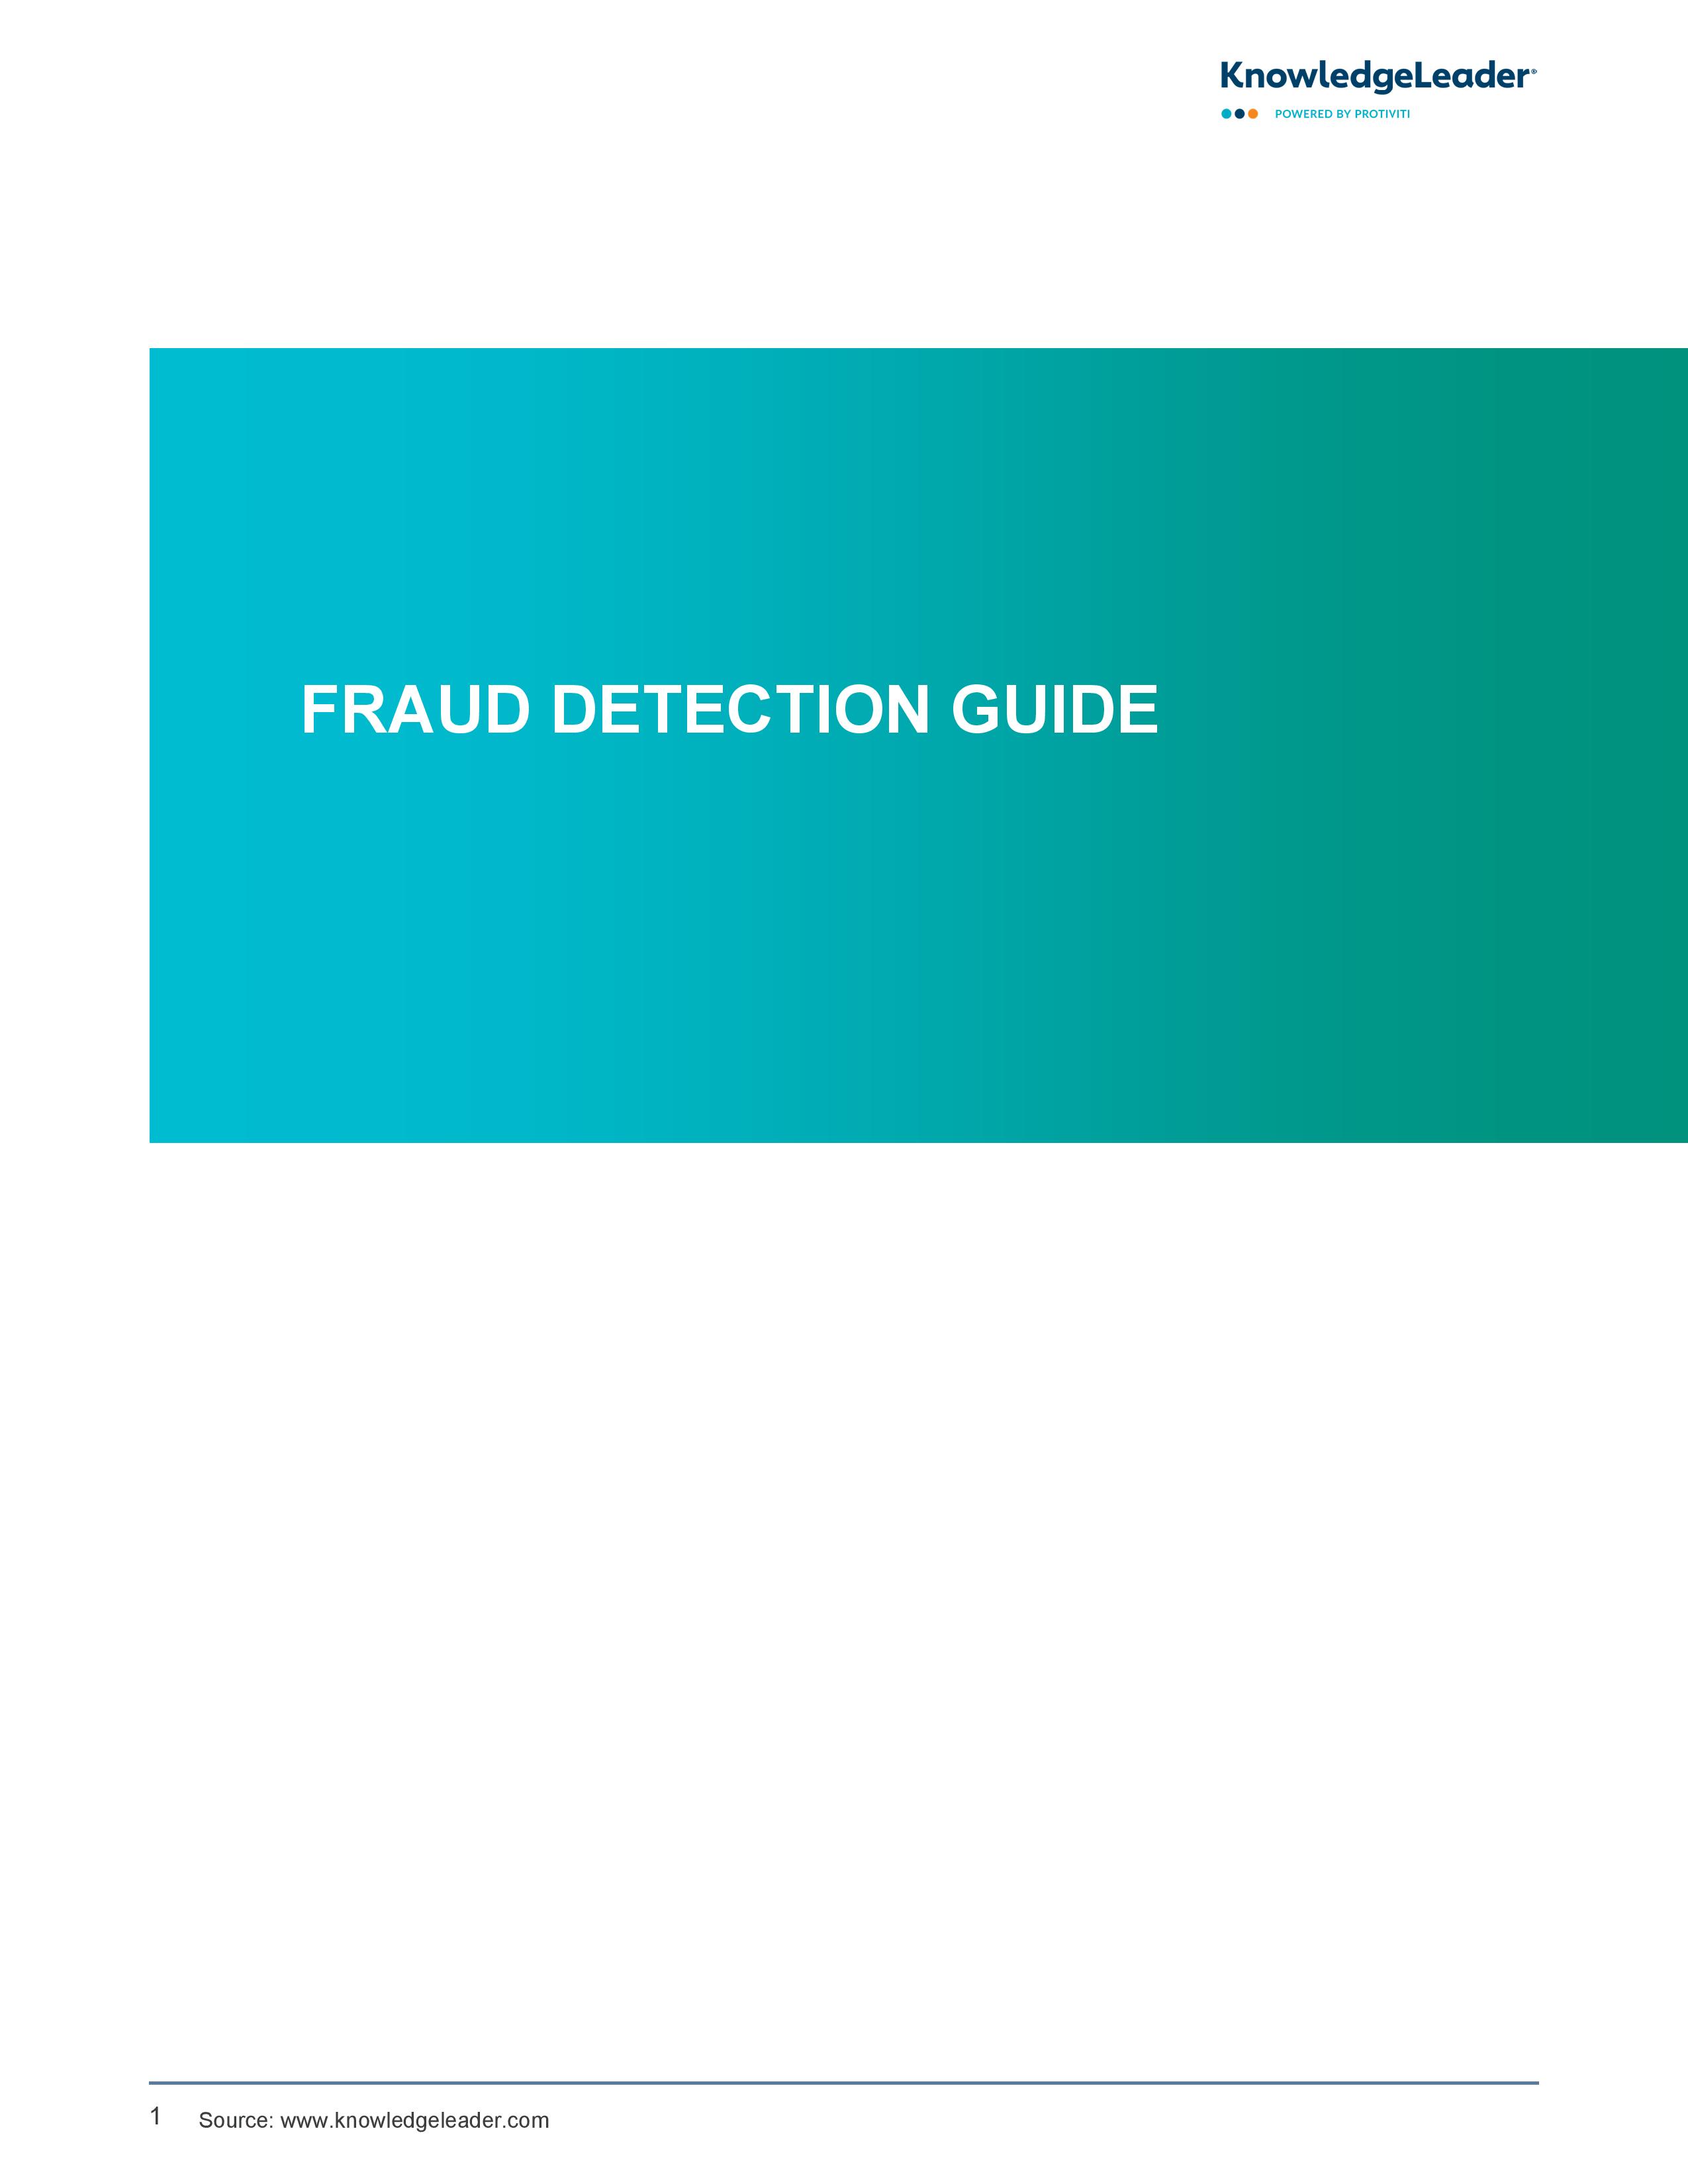 screenshot of the first page of Fraud Detection Guide